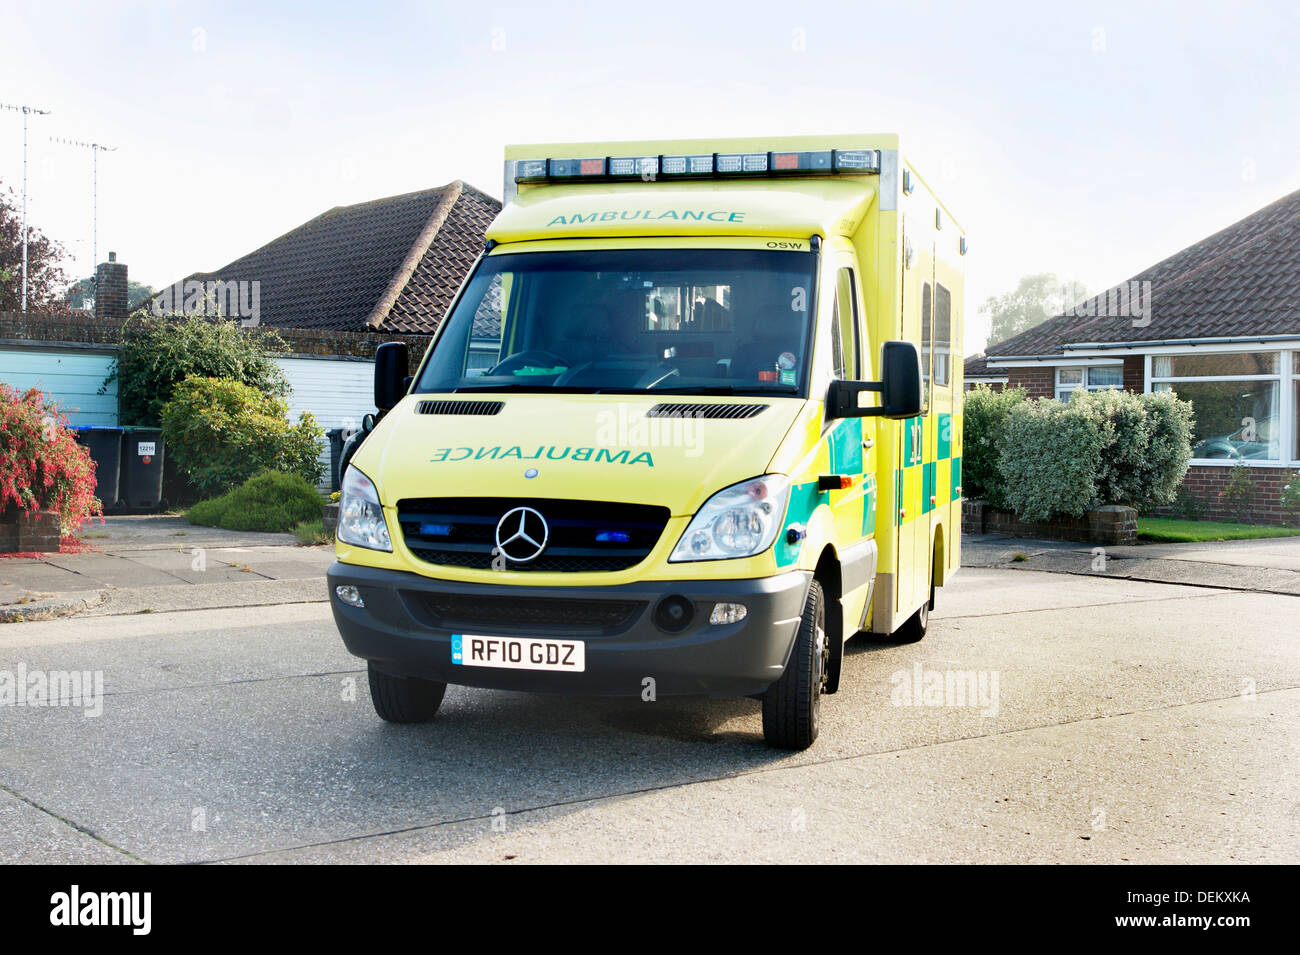 Sussex Emergency Ambulance Service Paramedic Unit West Sussex with access ready for a patient to get on / off Stock Photo